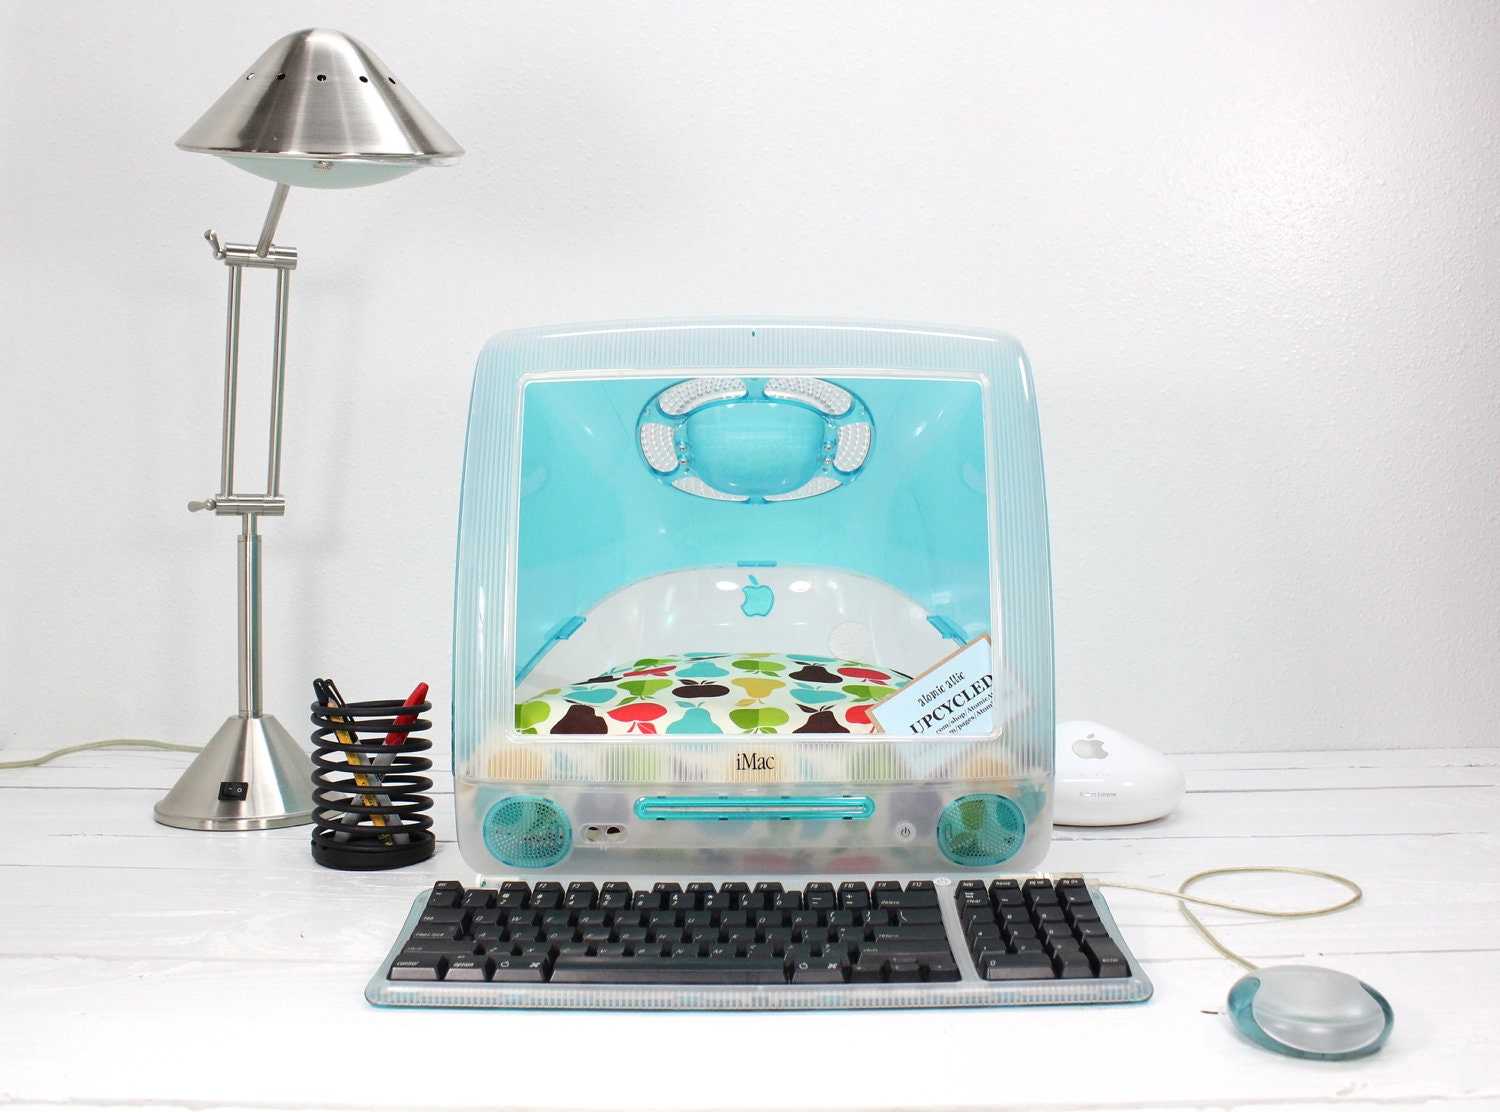 Upcycled Apple Computer Pet Bed - iMac - "Think different" FREE SHIPPING